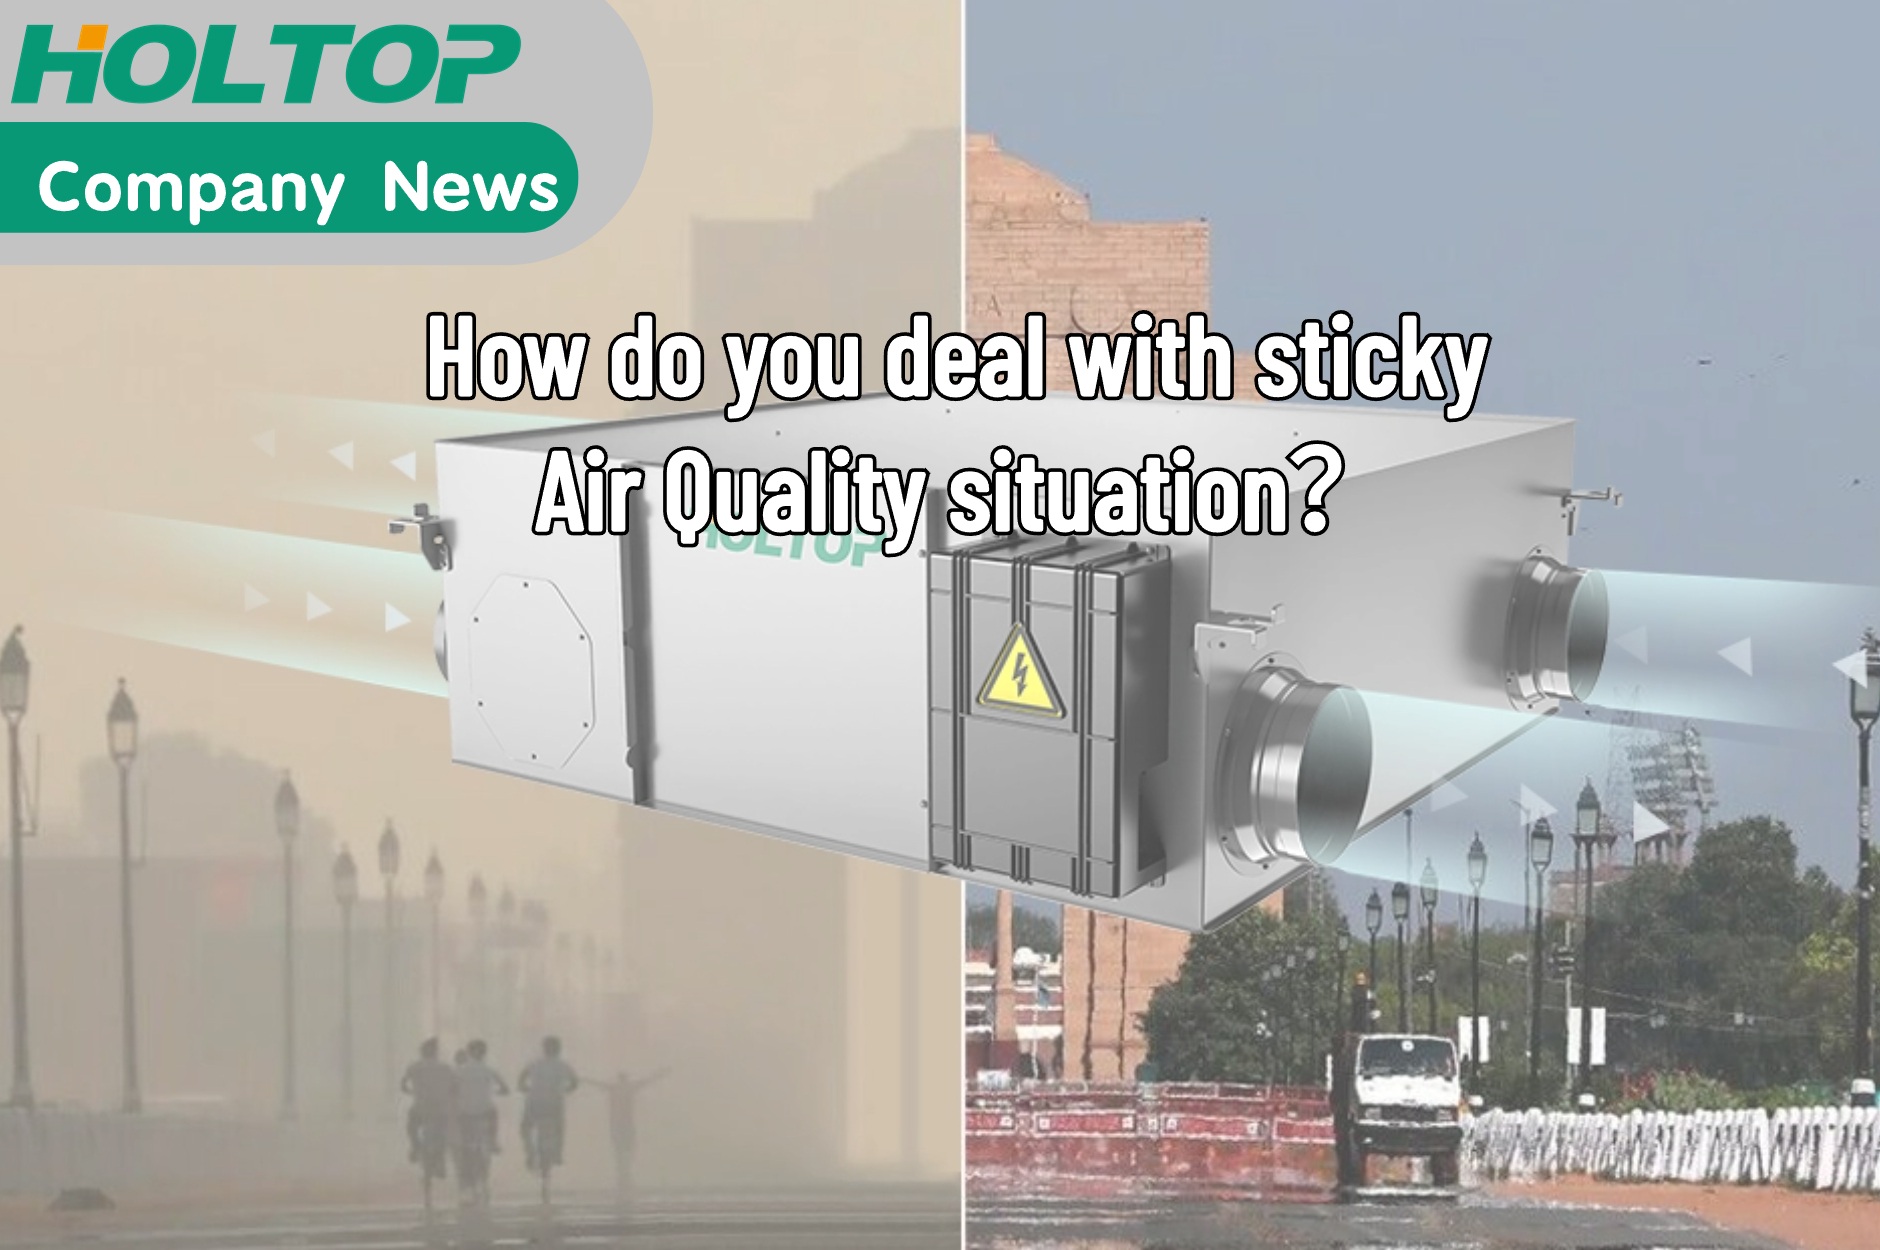 How do you deal with sticky Air Quality situation？